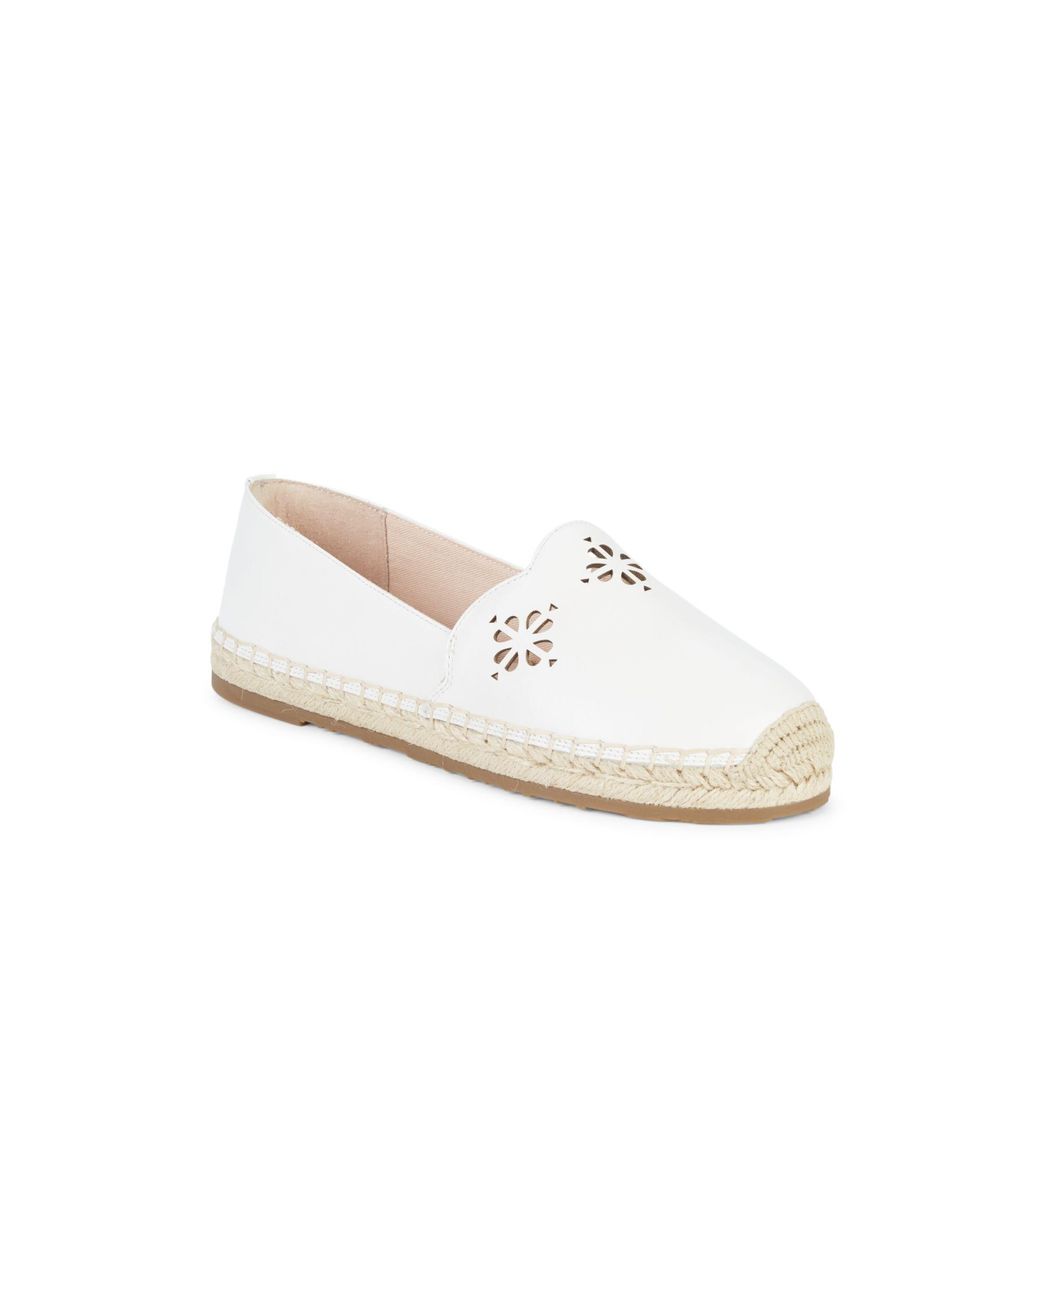 Kate Spade Grecian Leather Slip-on Espadrilles in White | Lyst